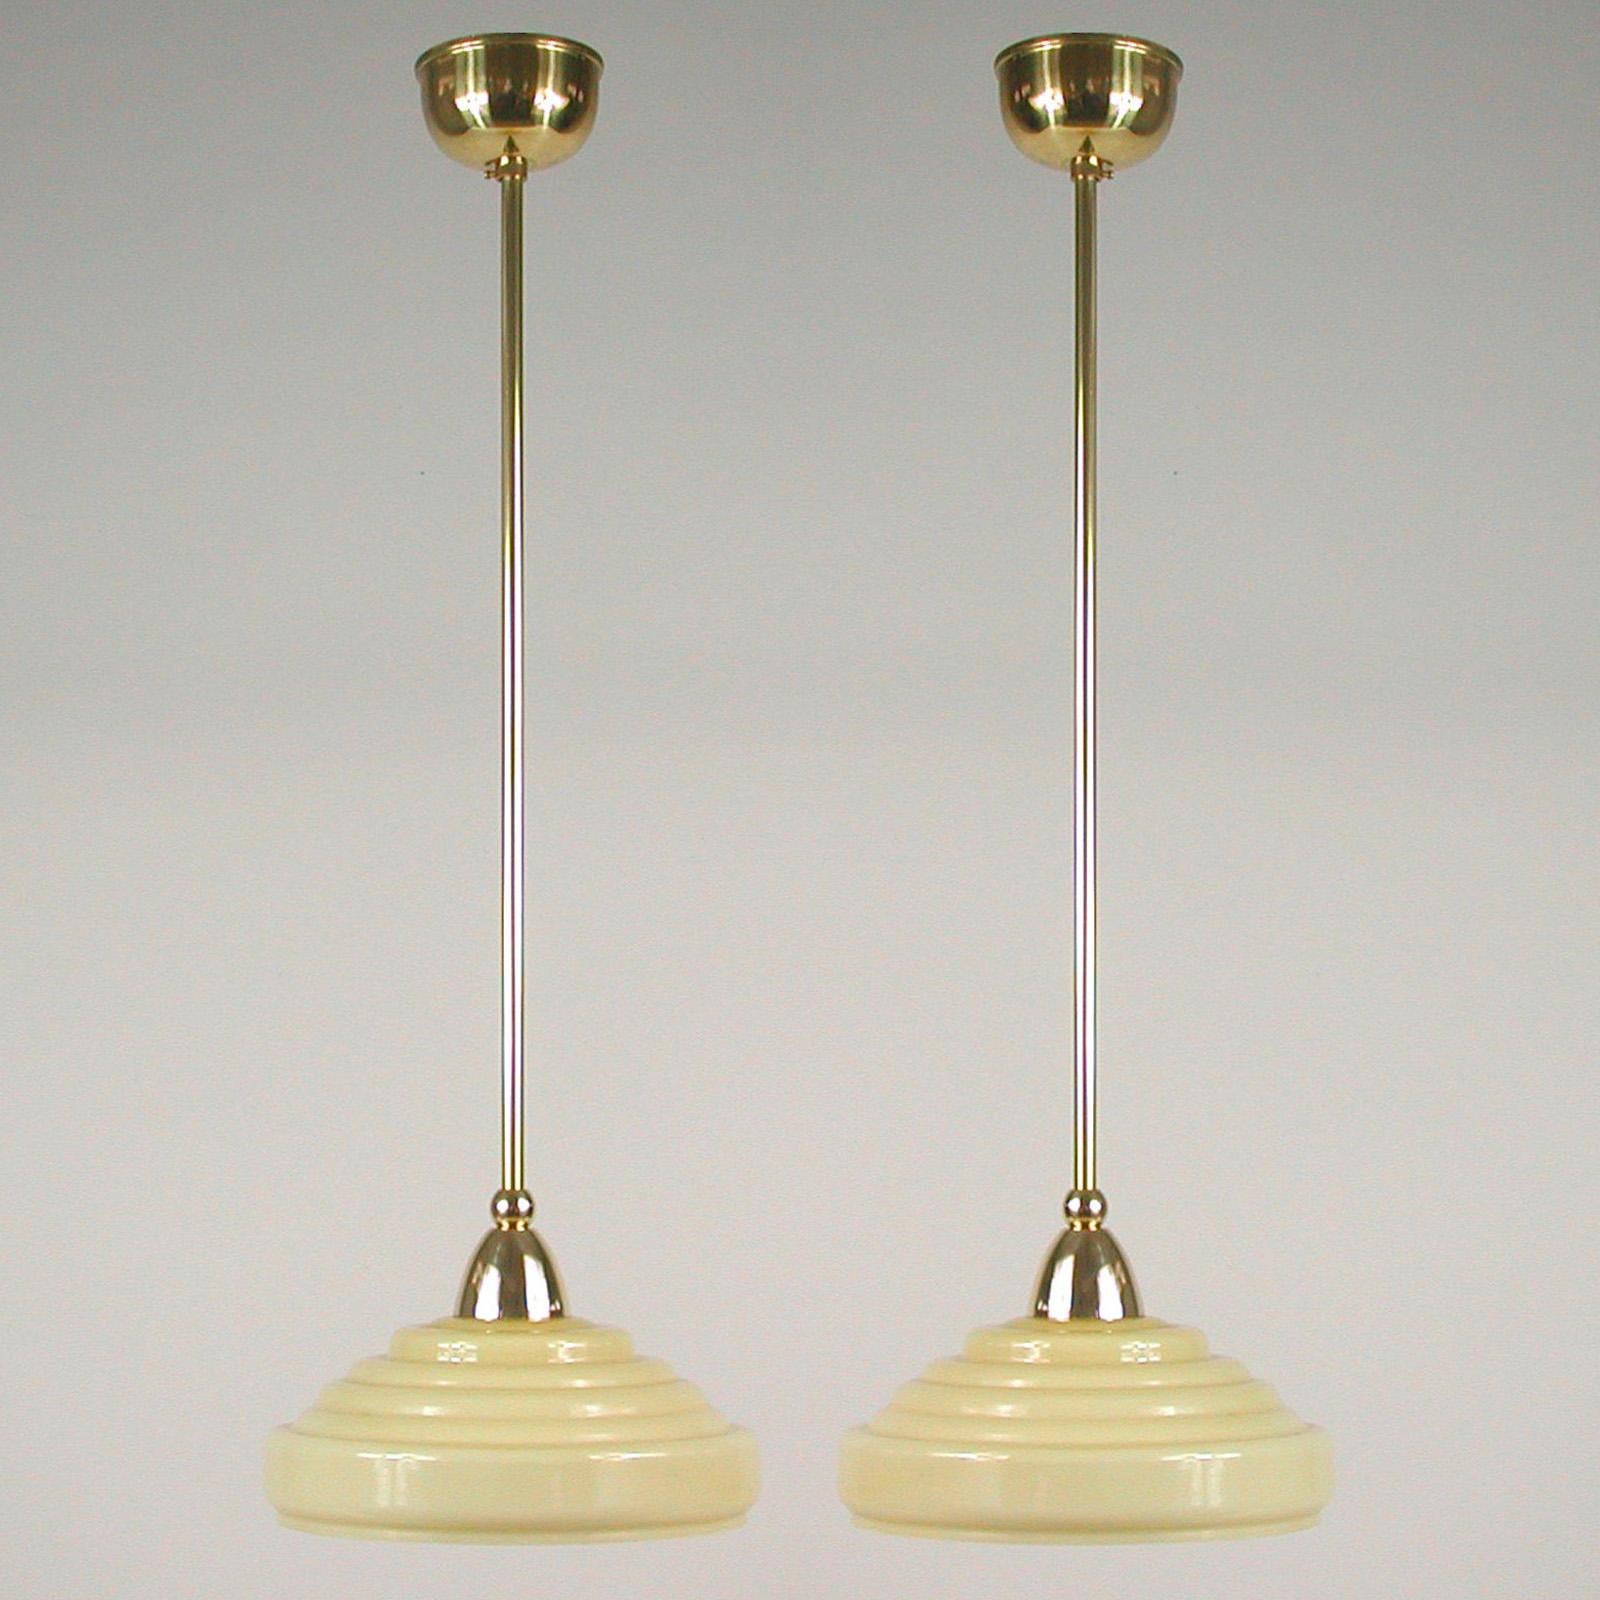 These elegant pendants were designed and manufactured in Sweden in the 1940s. The lamps feature cream opaline glass shades and brass hardware. Good vintage condition with one E14 socket each.

The lamps have been rewired and re-electrified for use